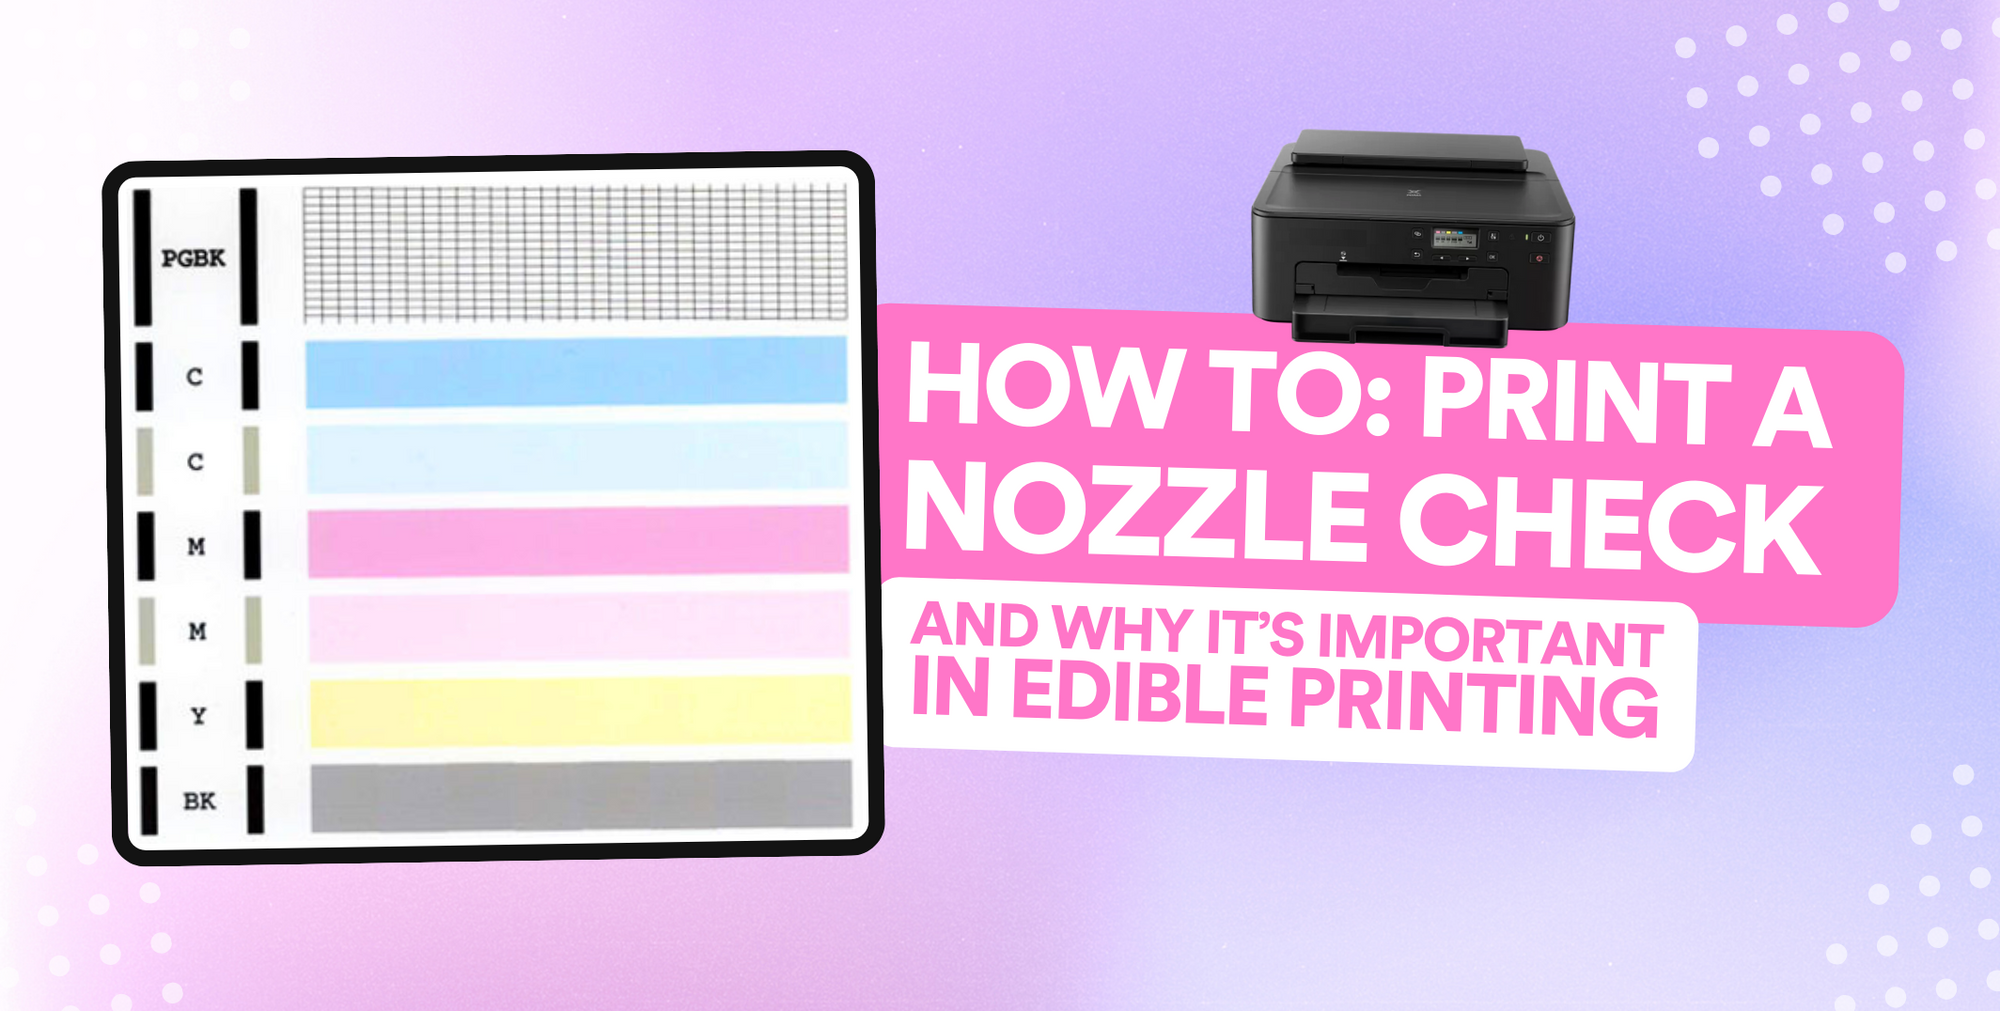 How to Print a Nozzle Check and Why It's Important in Edible Printing